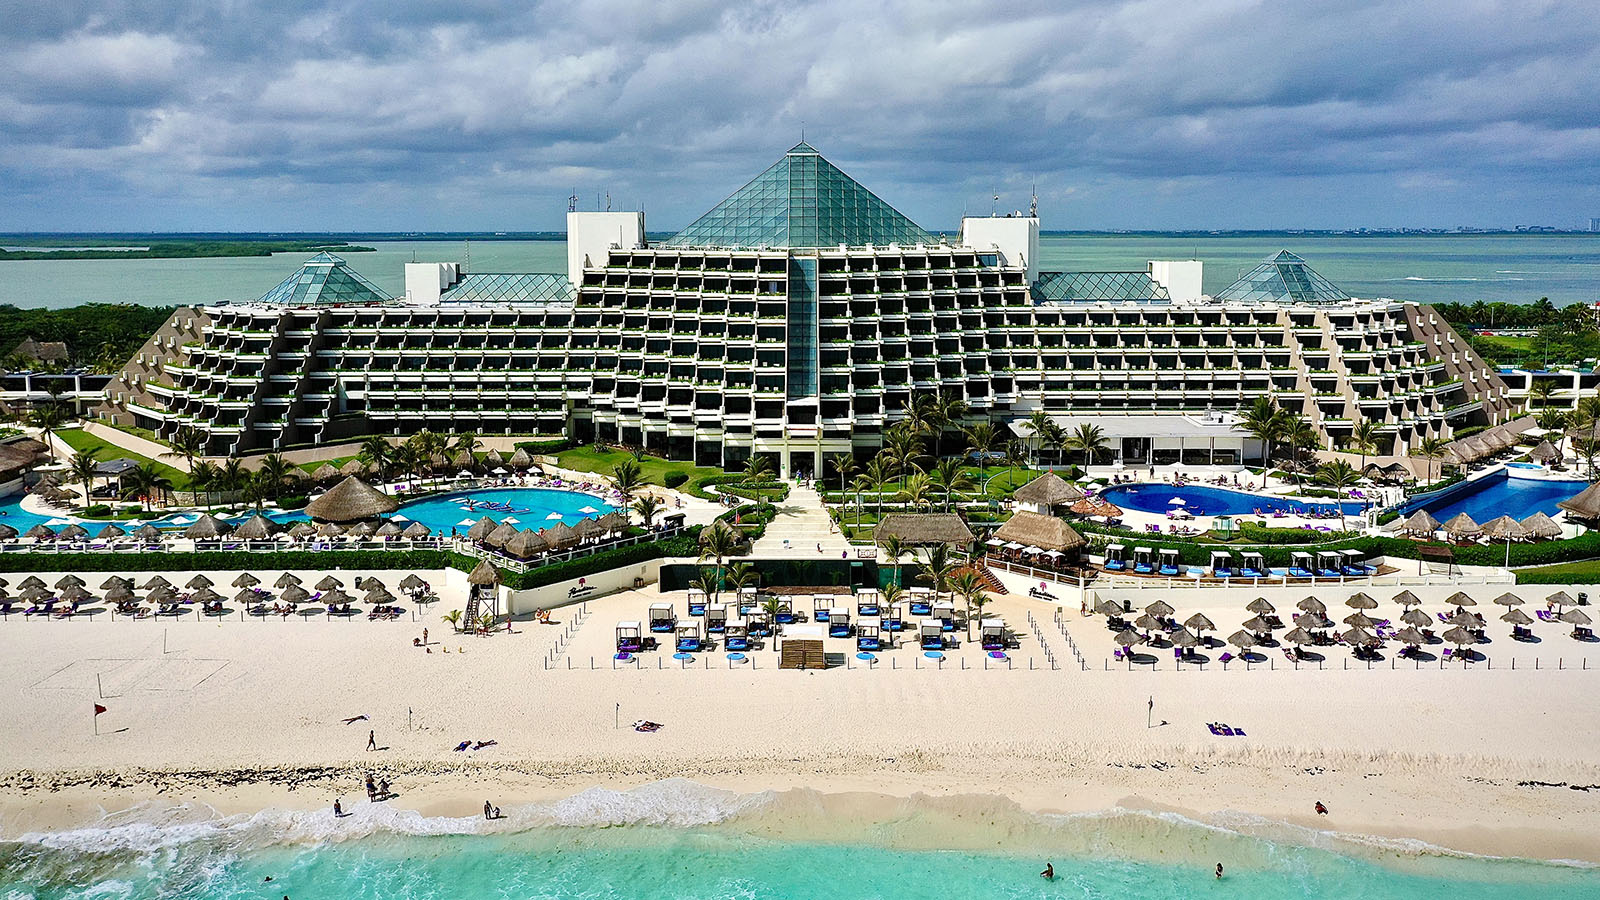 Hotel Paradisus Cancun, Luxury Resort In Cancun, Mexico, 57% OFF